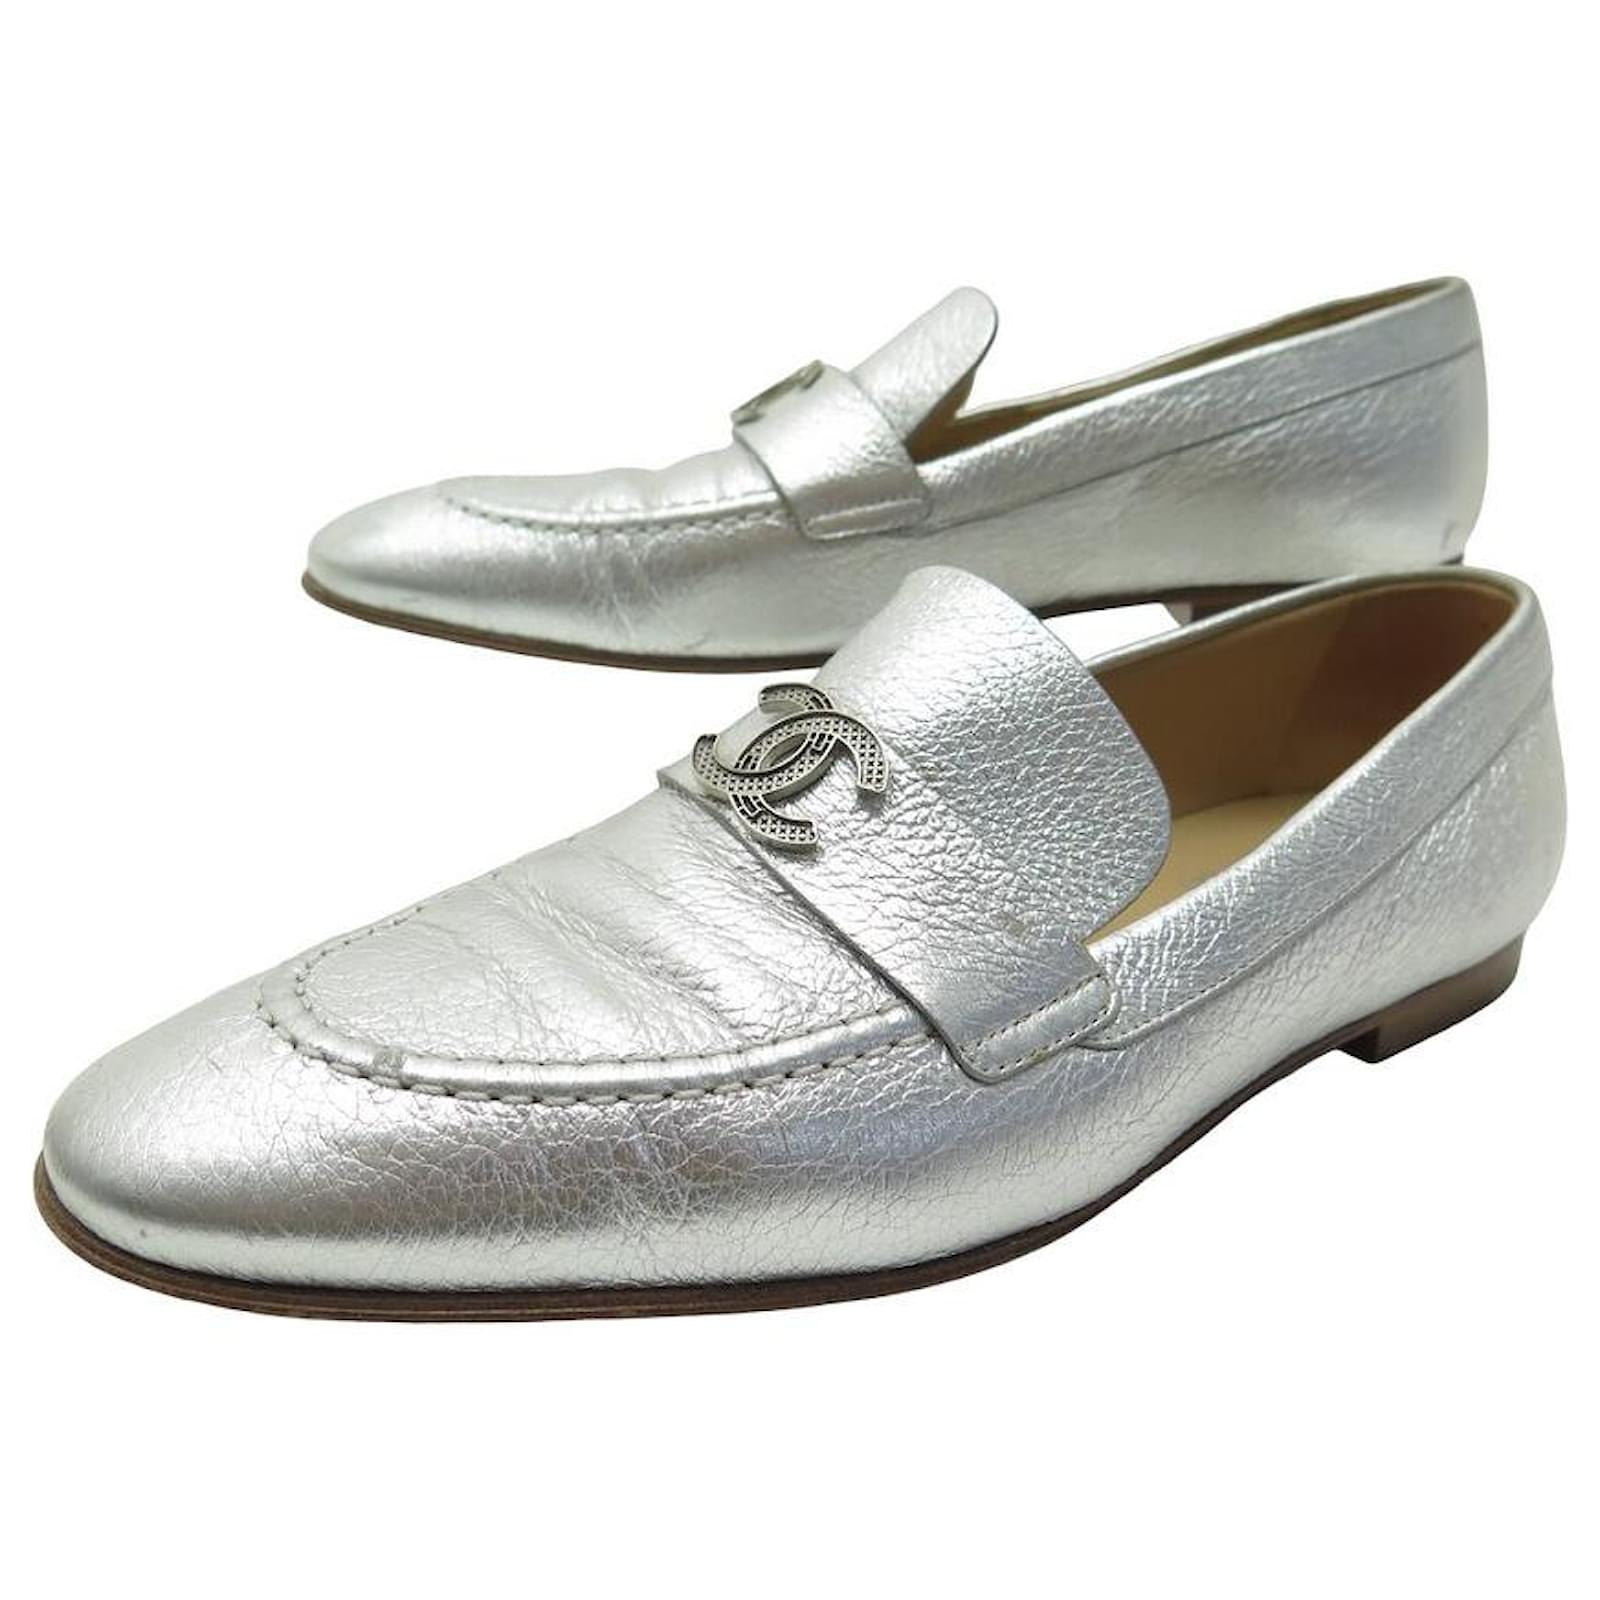 CHANEL G SHOES33153 CC LOGO LOAFERS IN SILVER LEATHER 38.5 Loafers